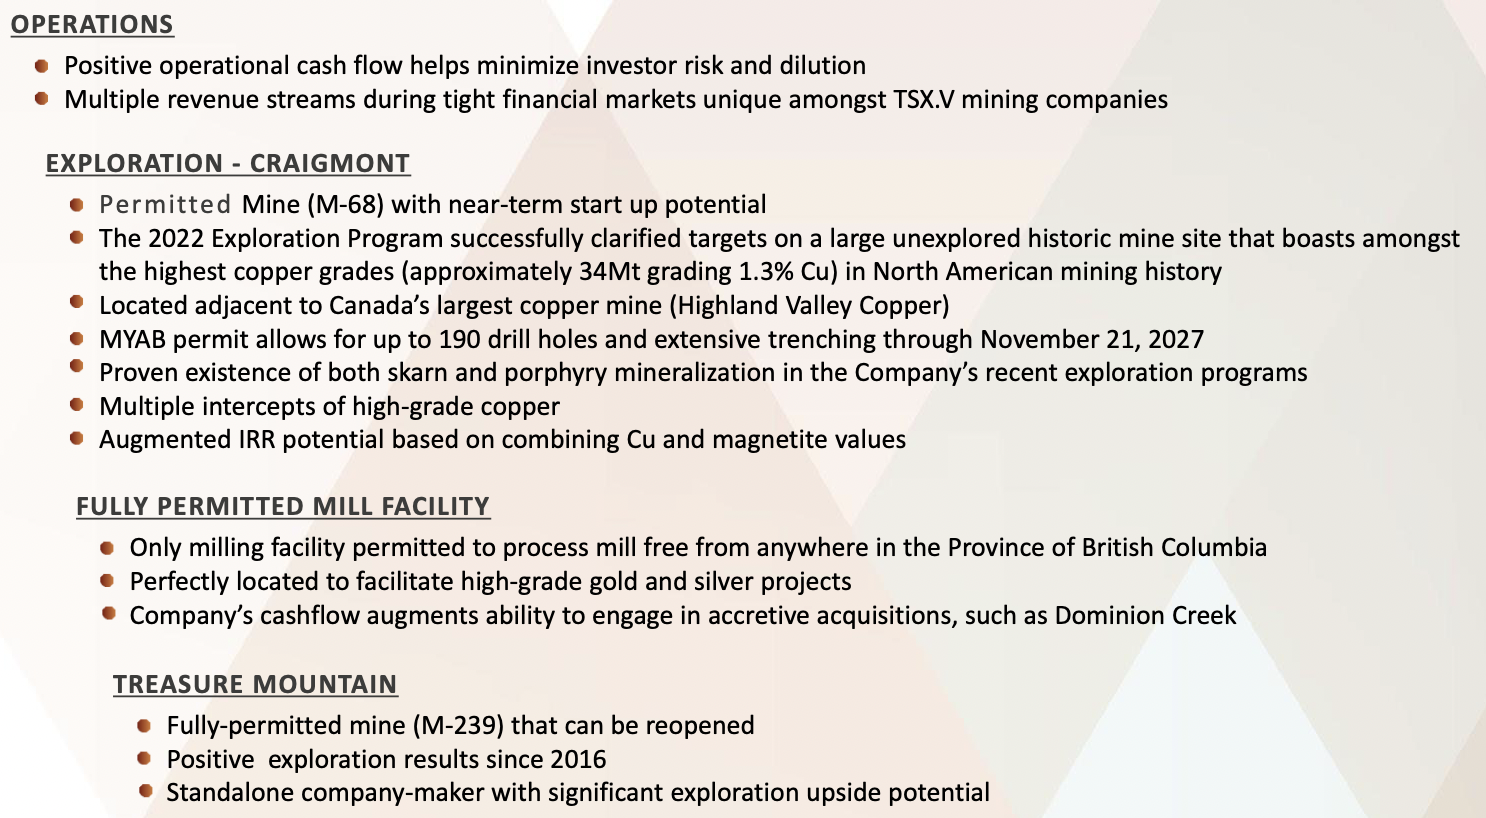 Nicola Mining; copper, silver, gold — with current cash flow — in prolific B.C., Canada